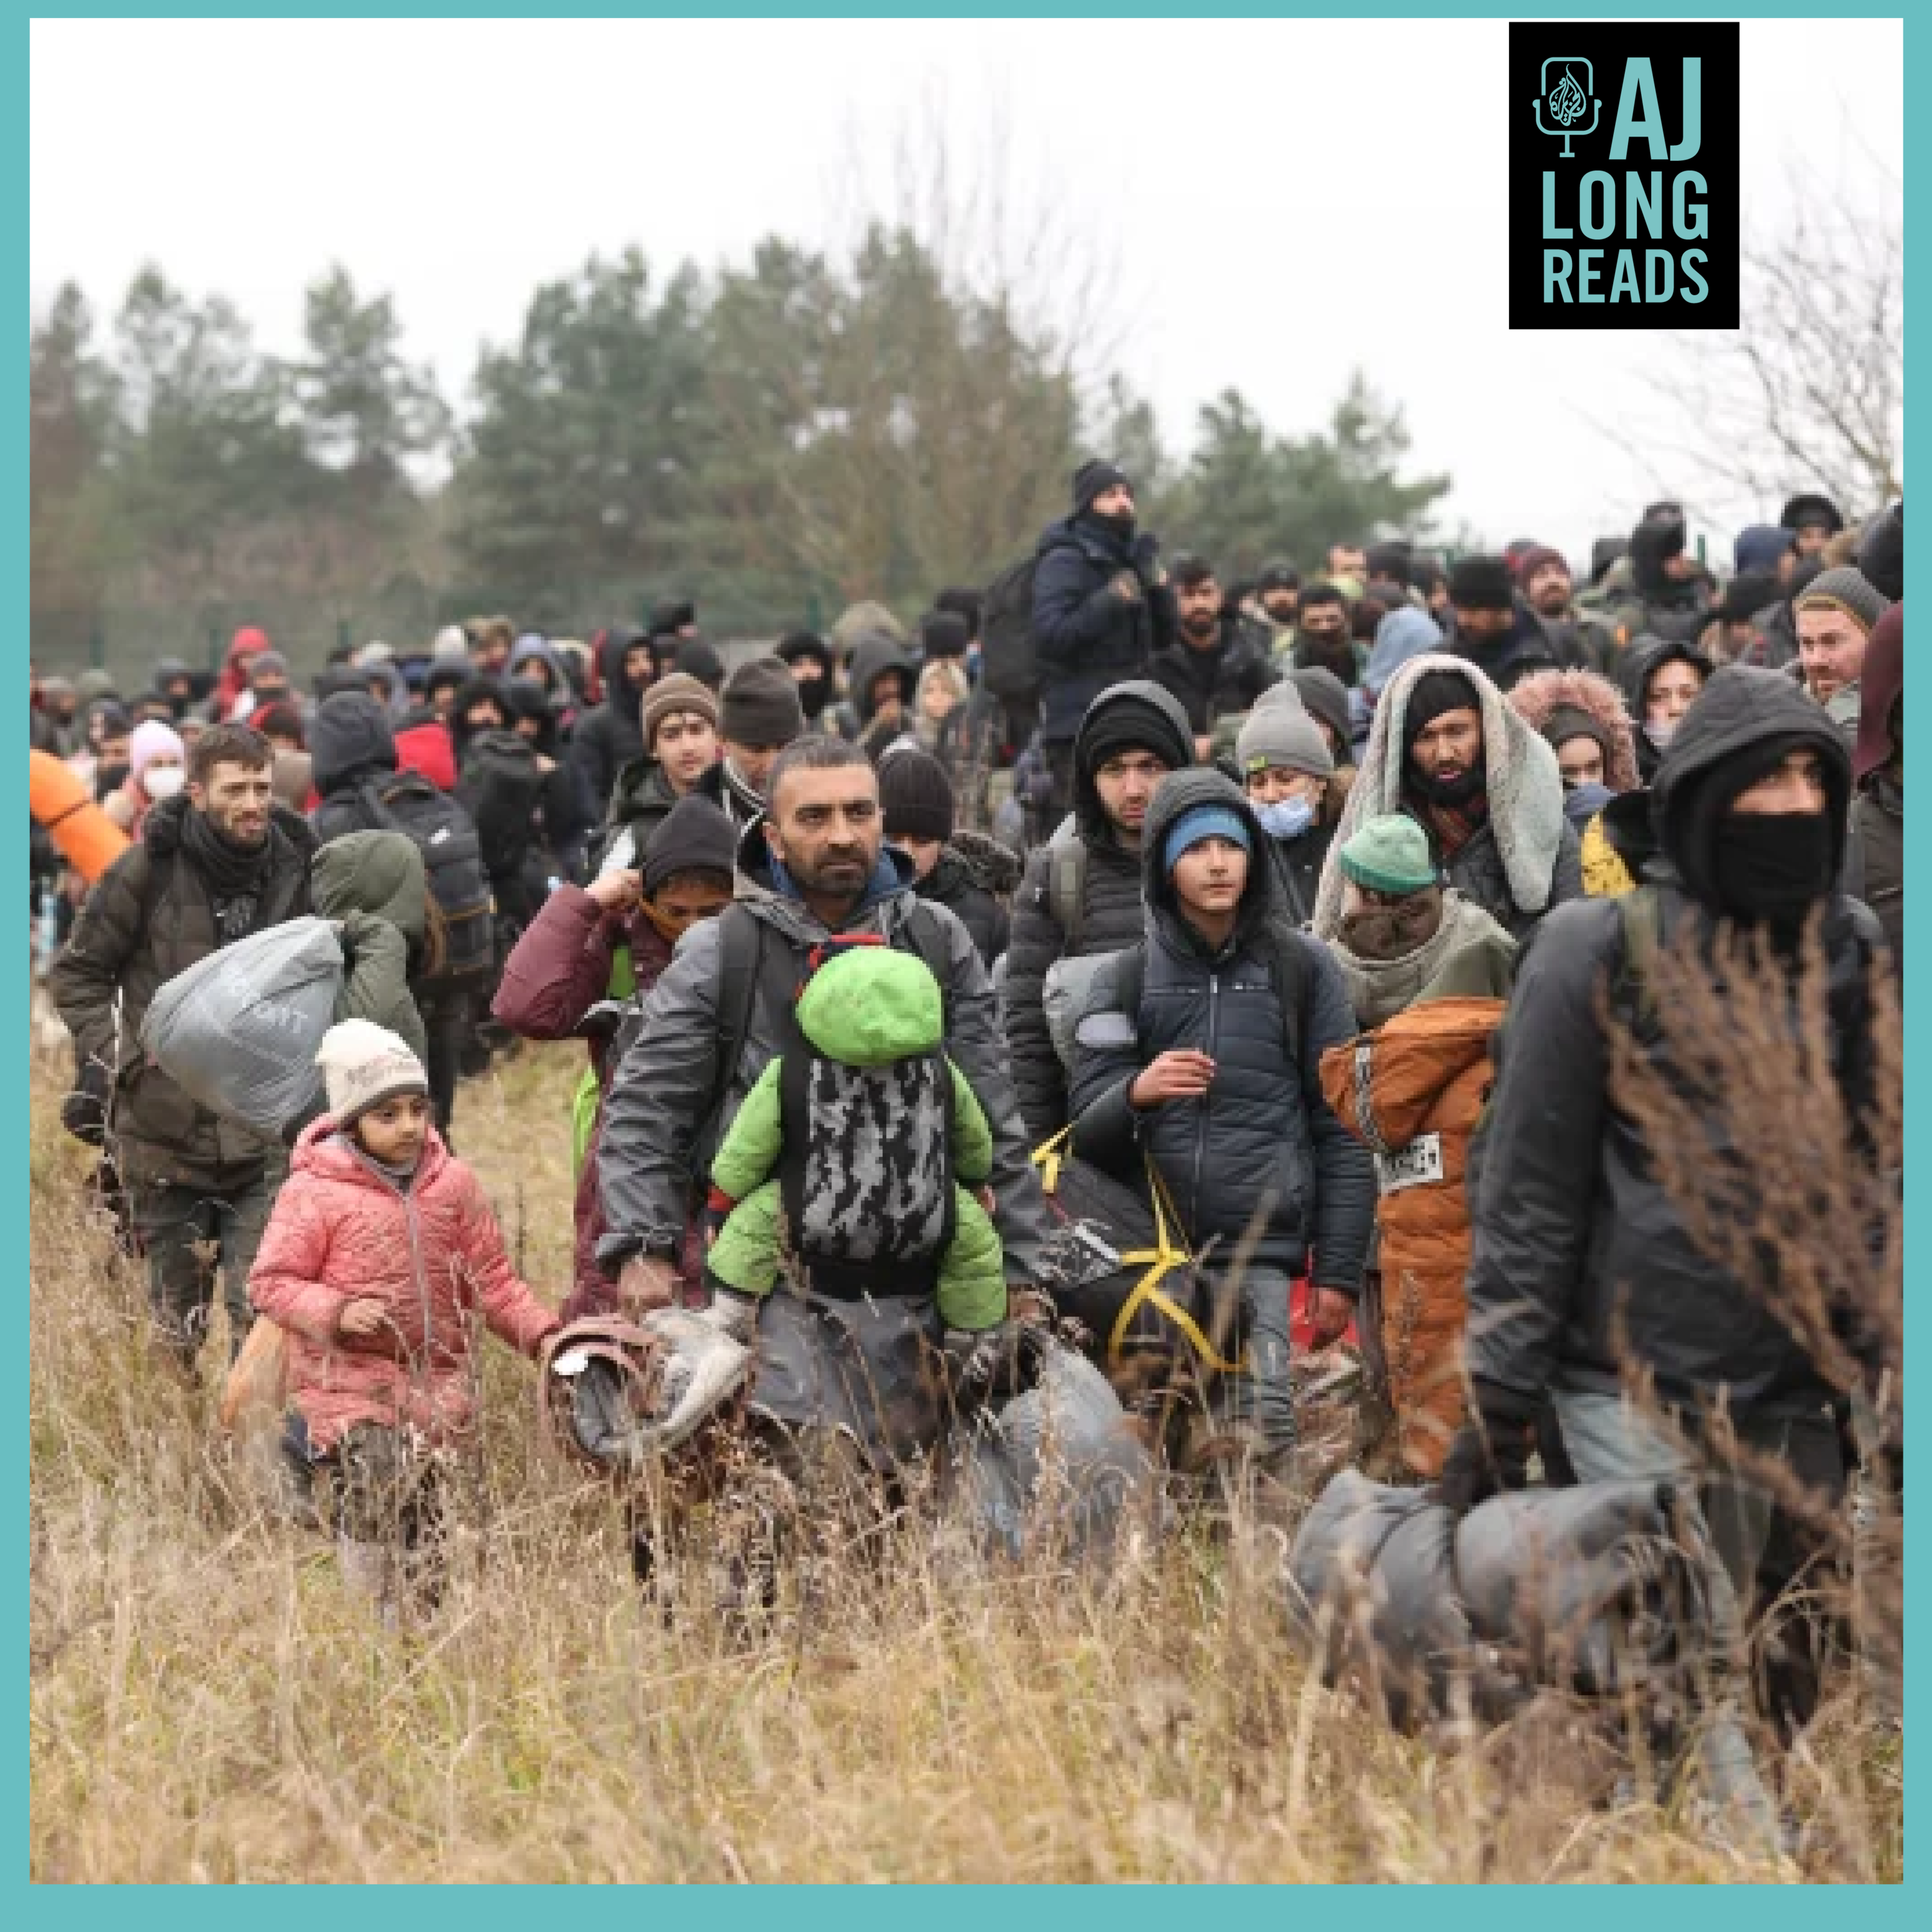 Poland-Belarus border: The people pushed back in a Polish forest